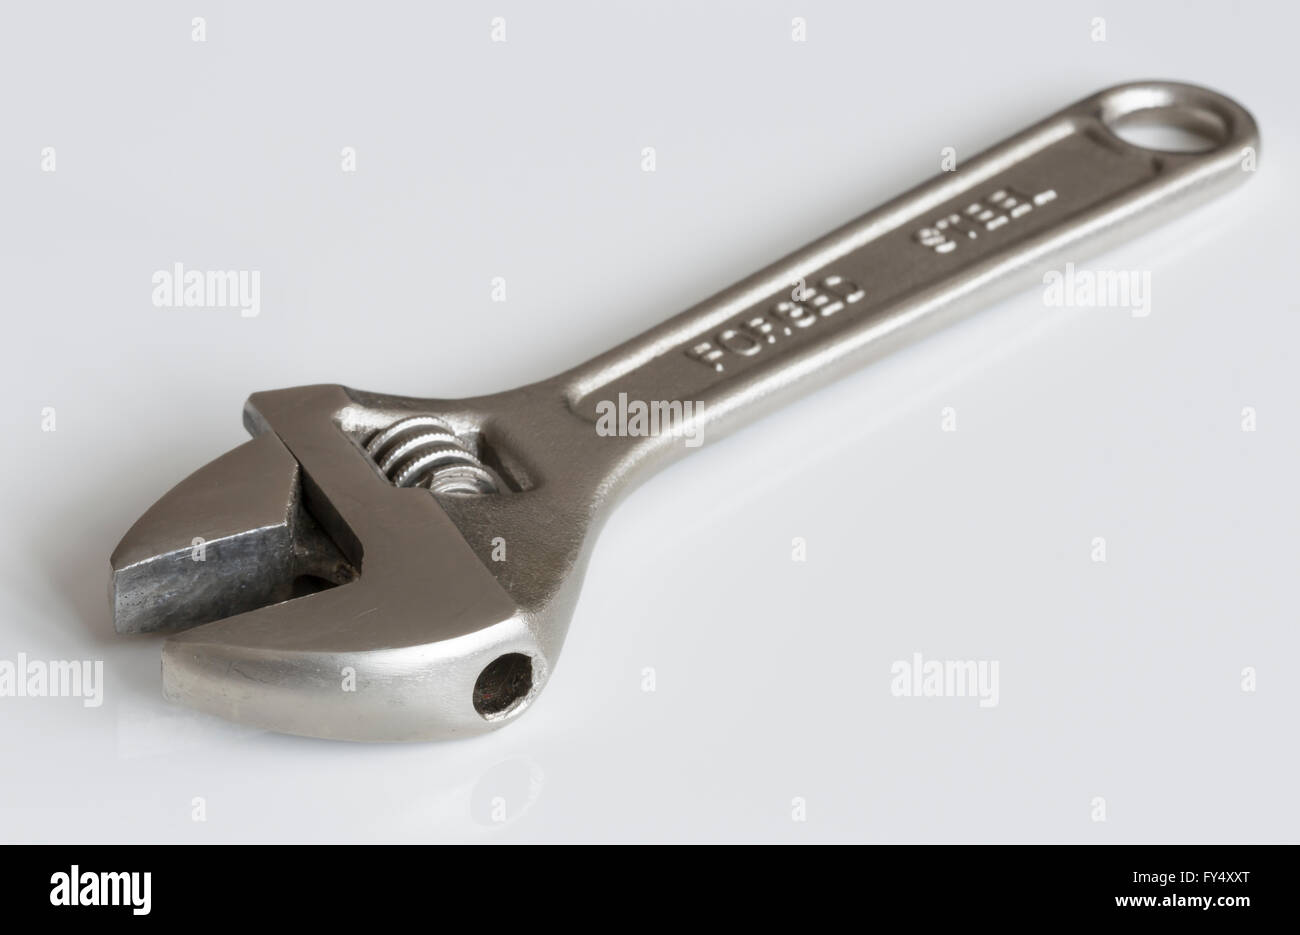 Wrench Close Up on white background. Stock Photo